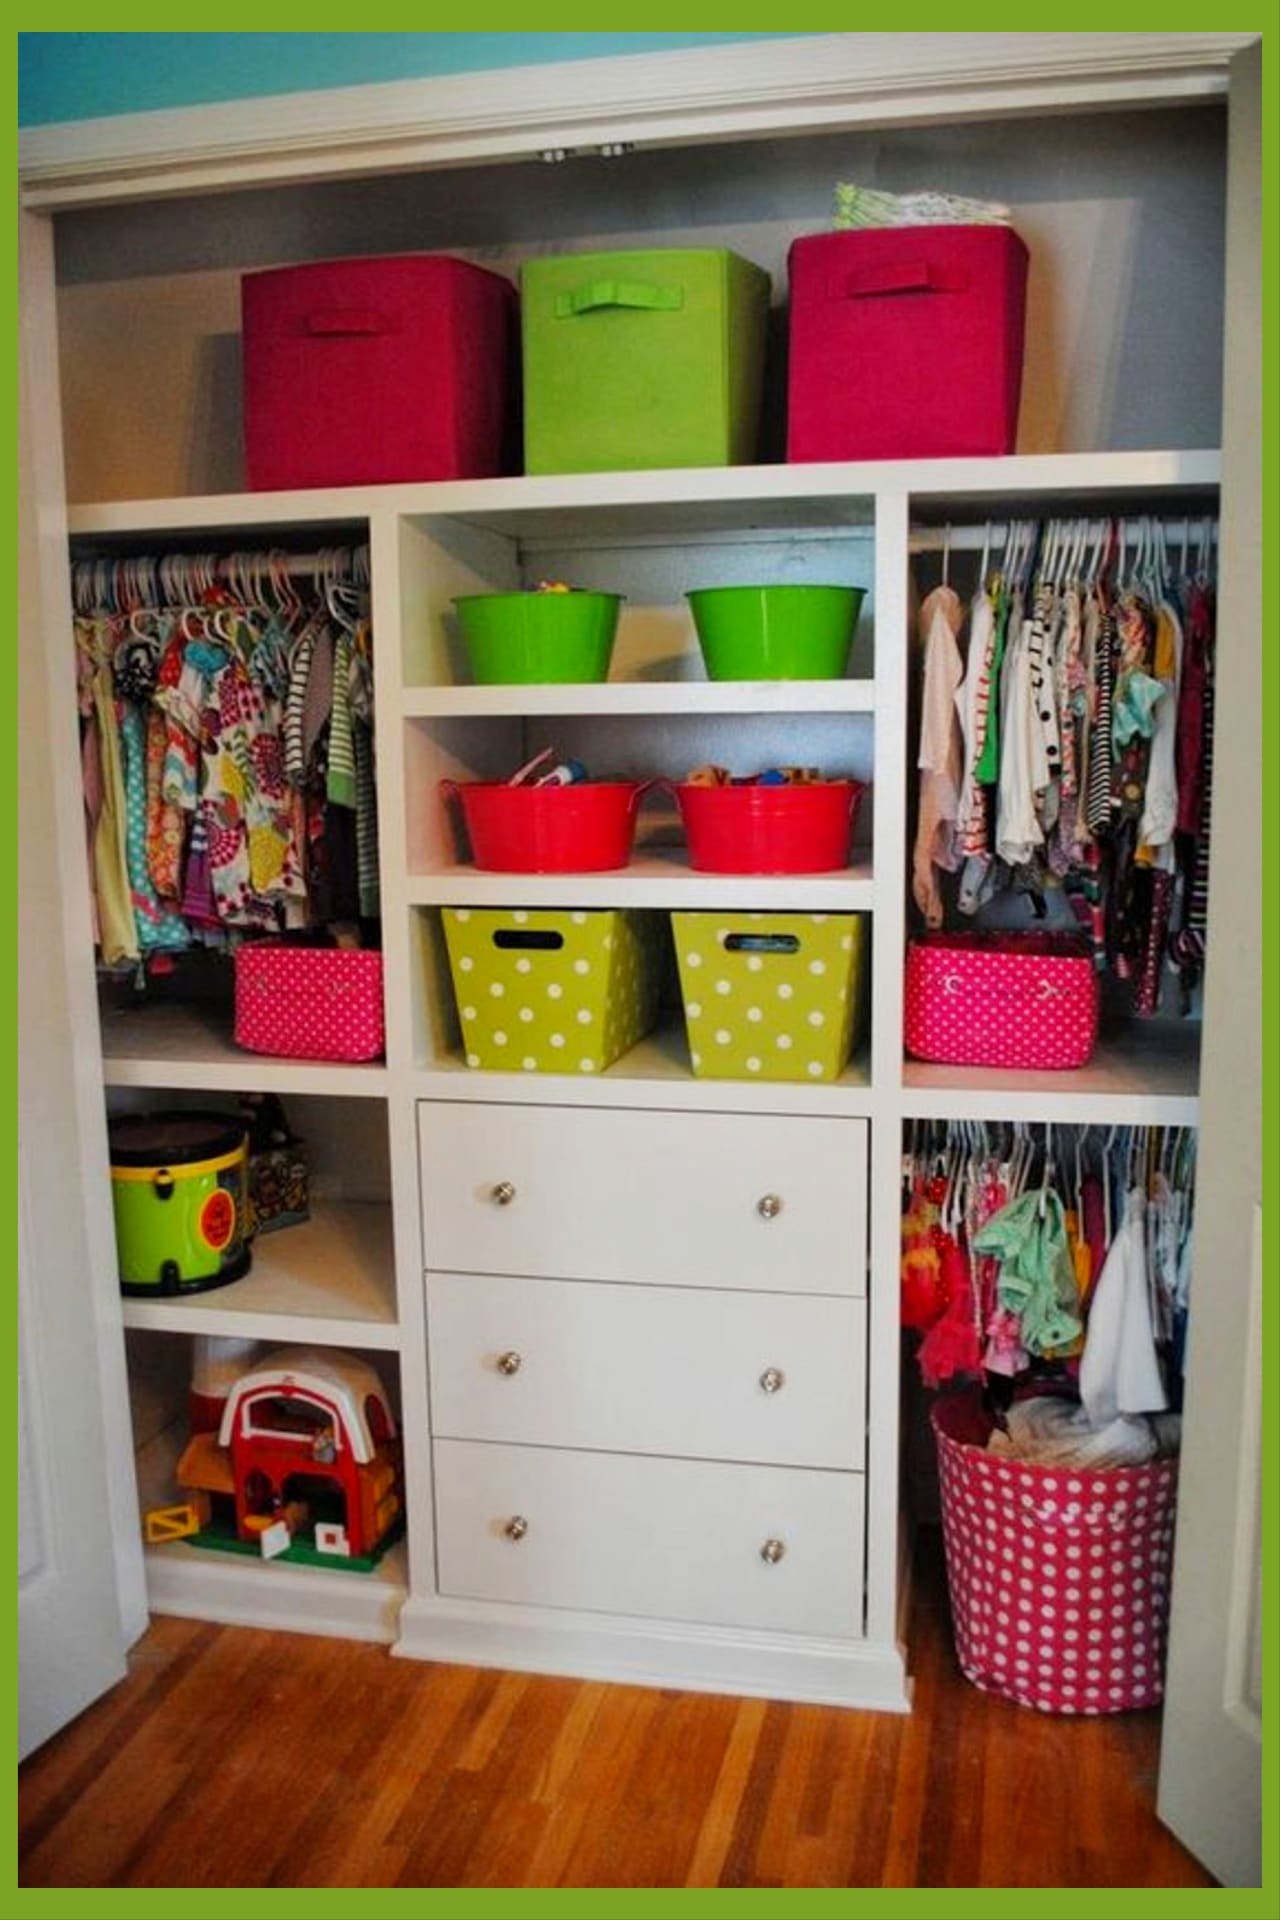 Baby nursery closet organization ideas and baby clothes organization ideas - super smart organization ideas for the home even if you're on a budget